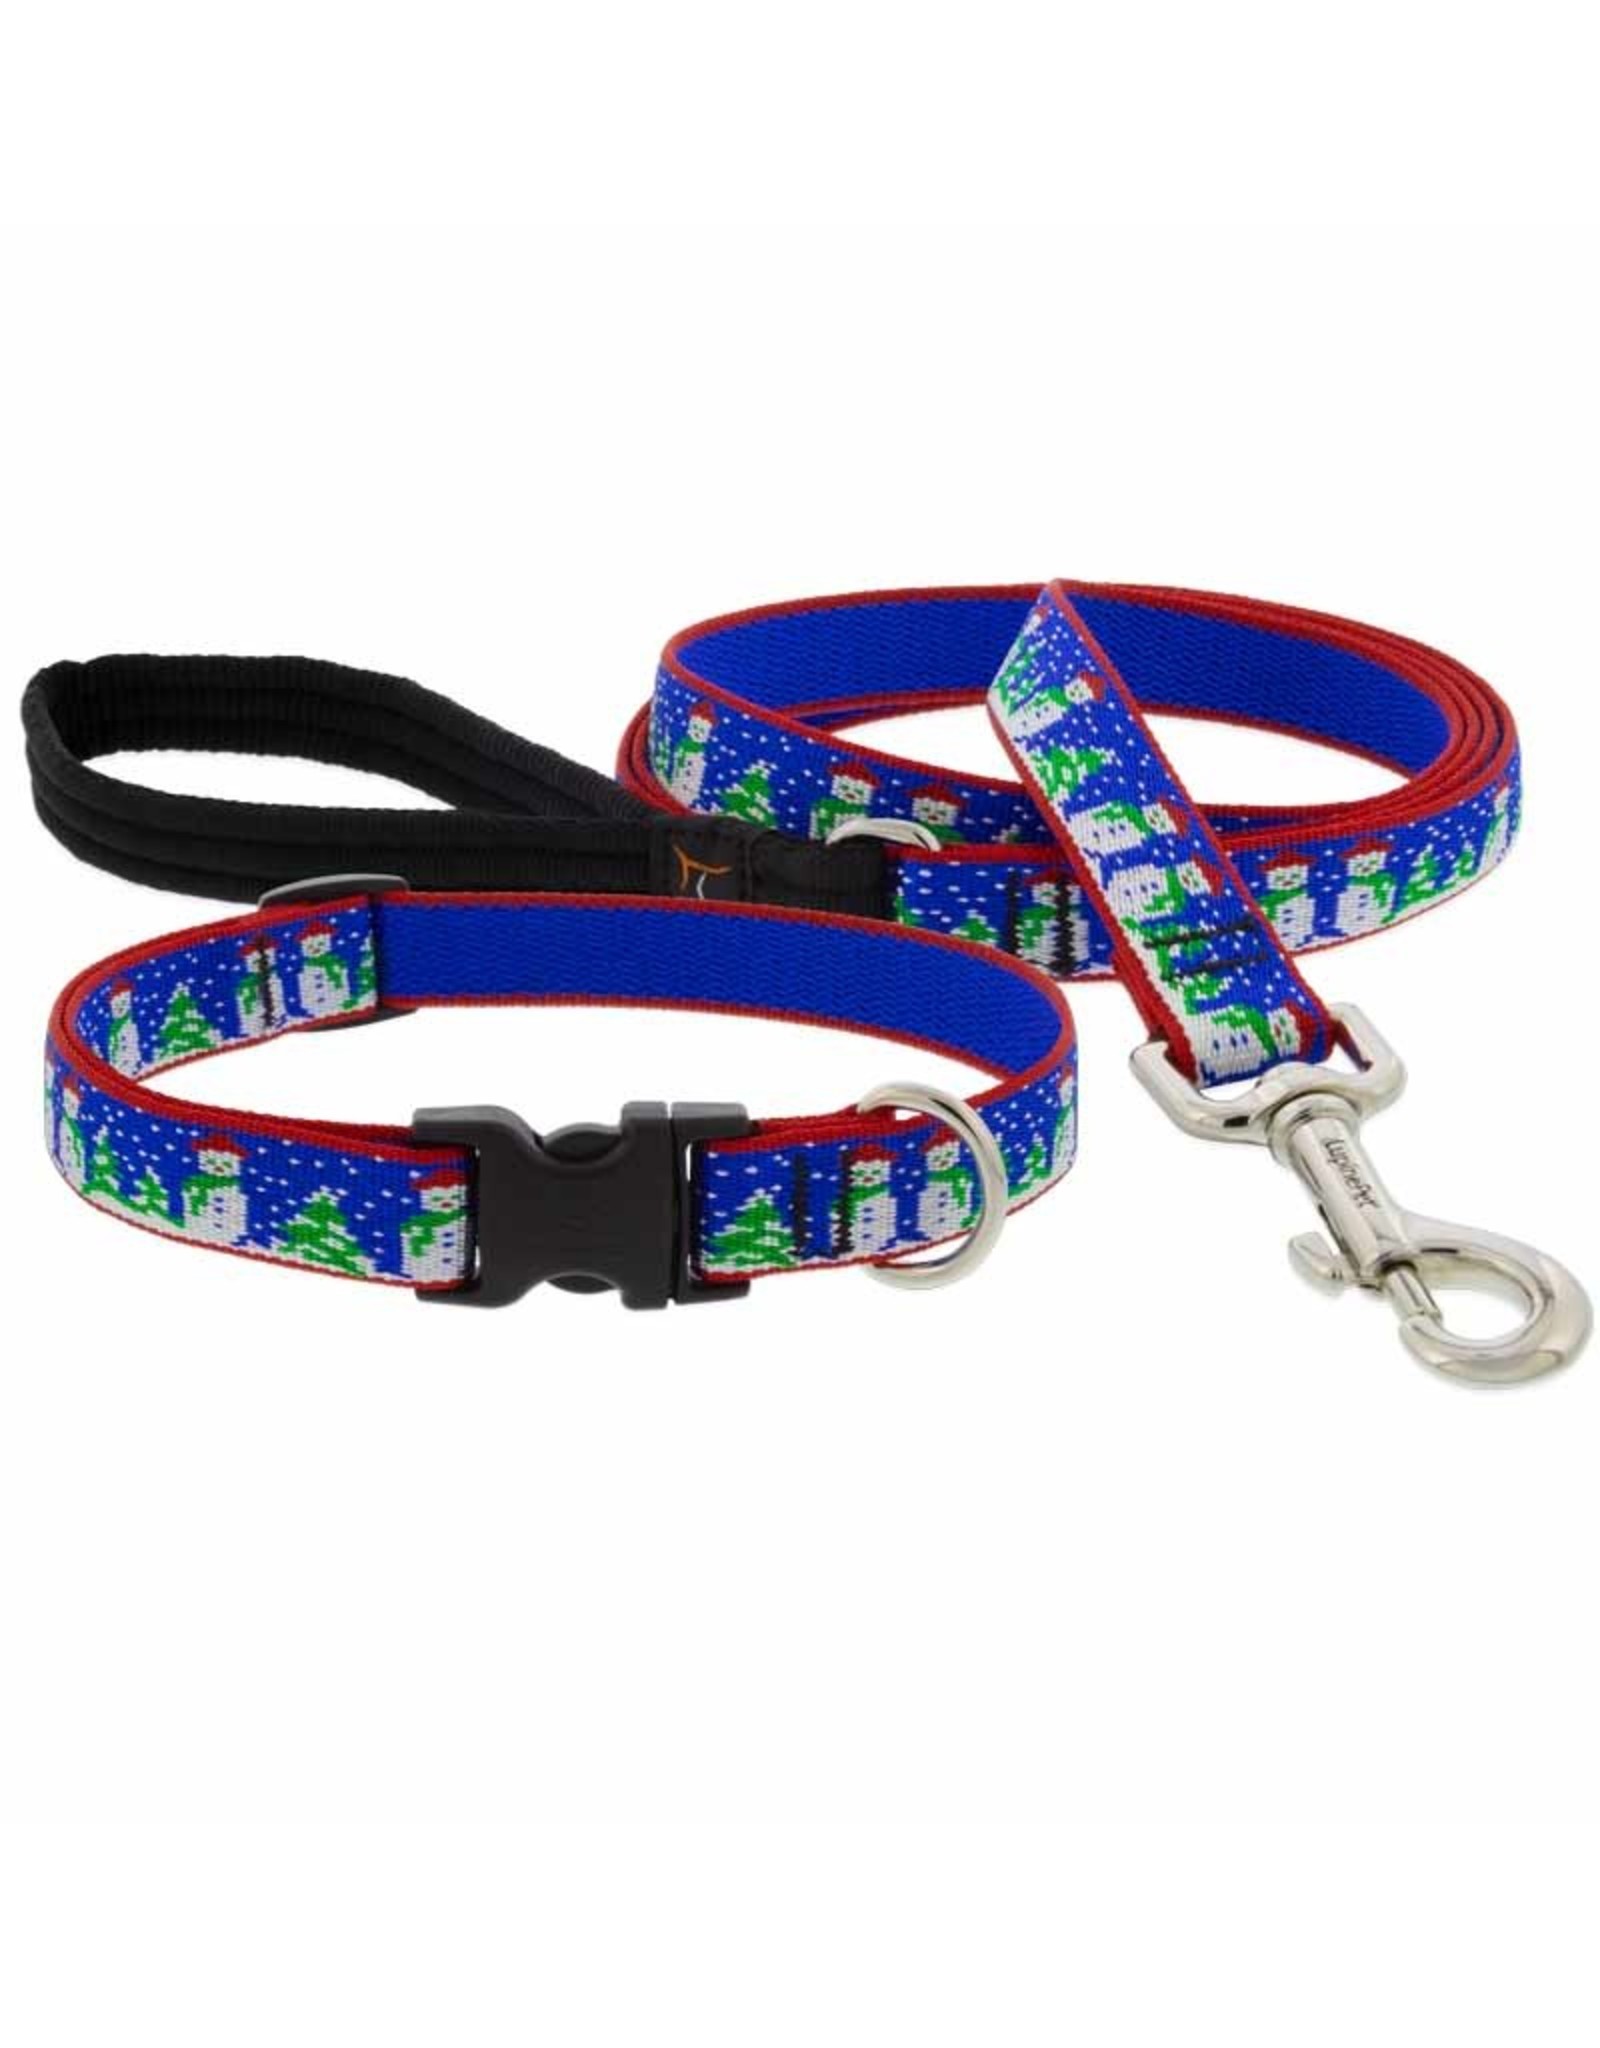 Lupine Lupine Jack Frost Collar: 3/4 in wide, 9-14 inch